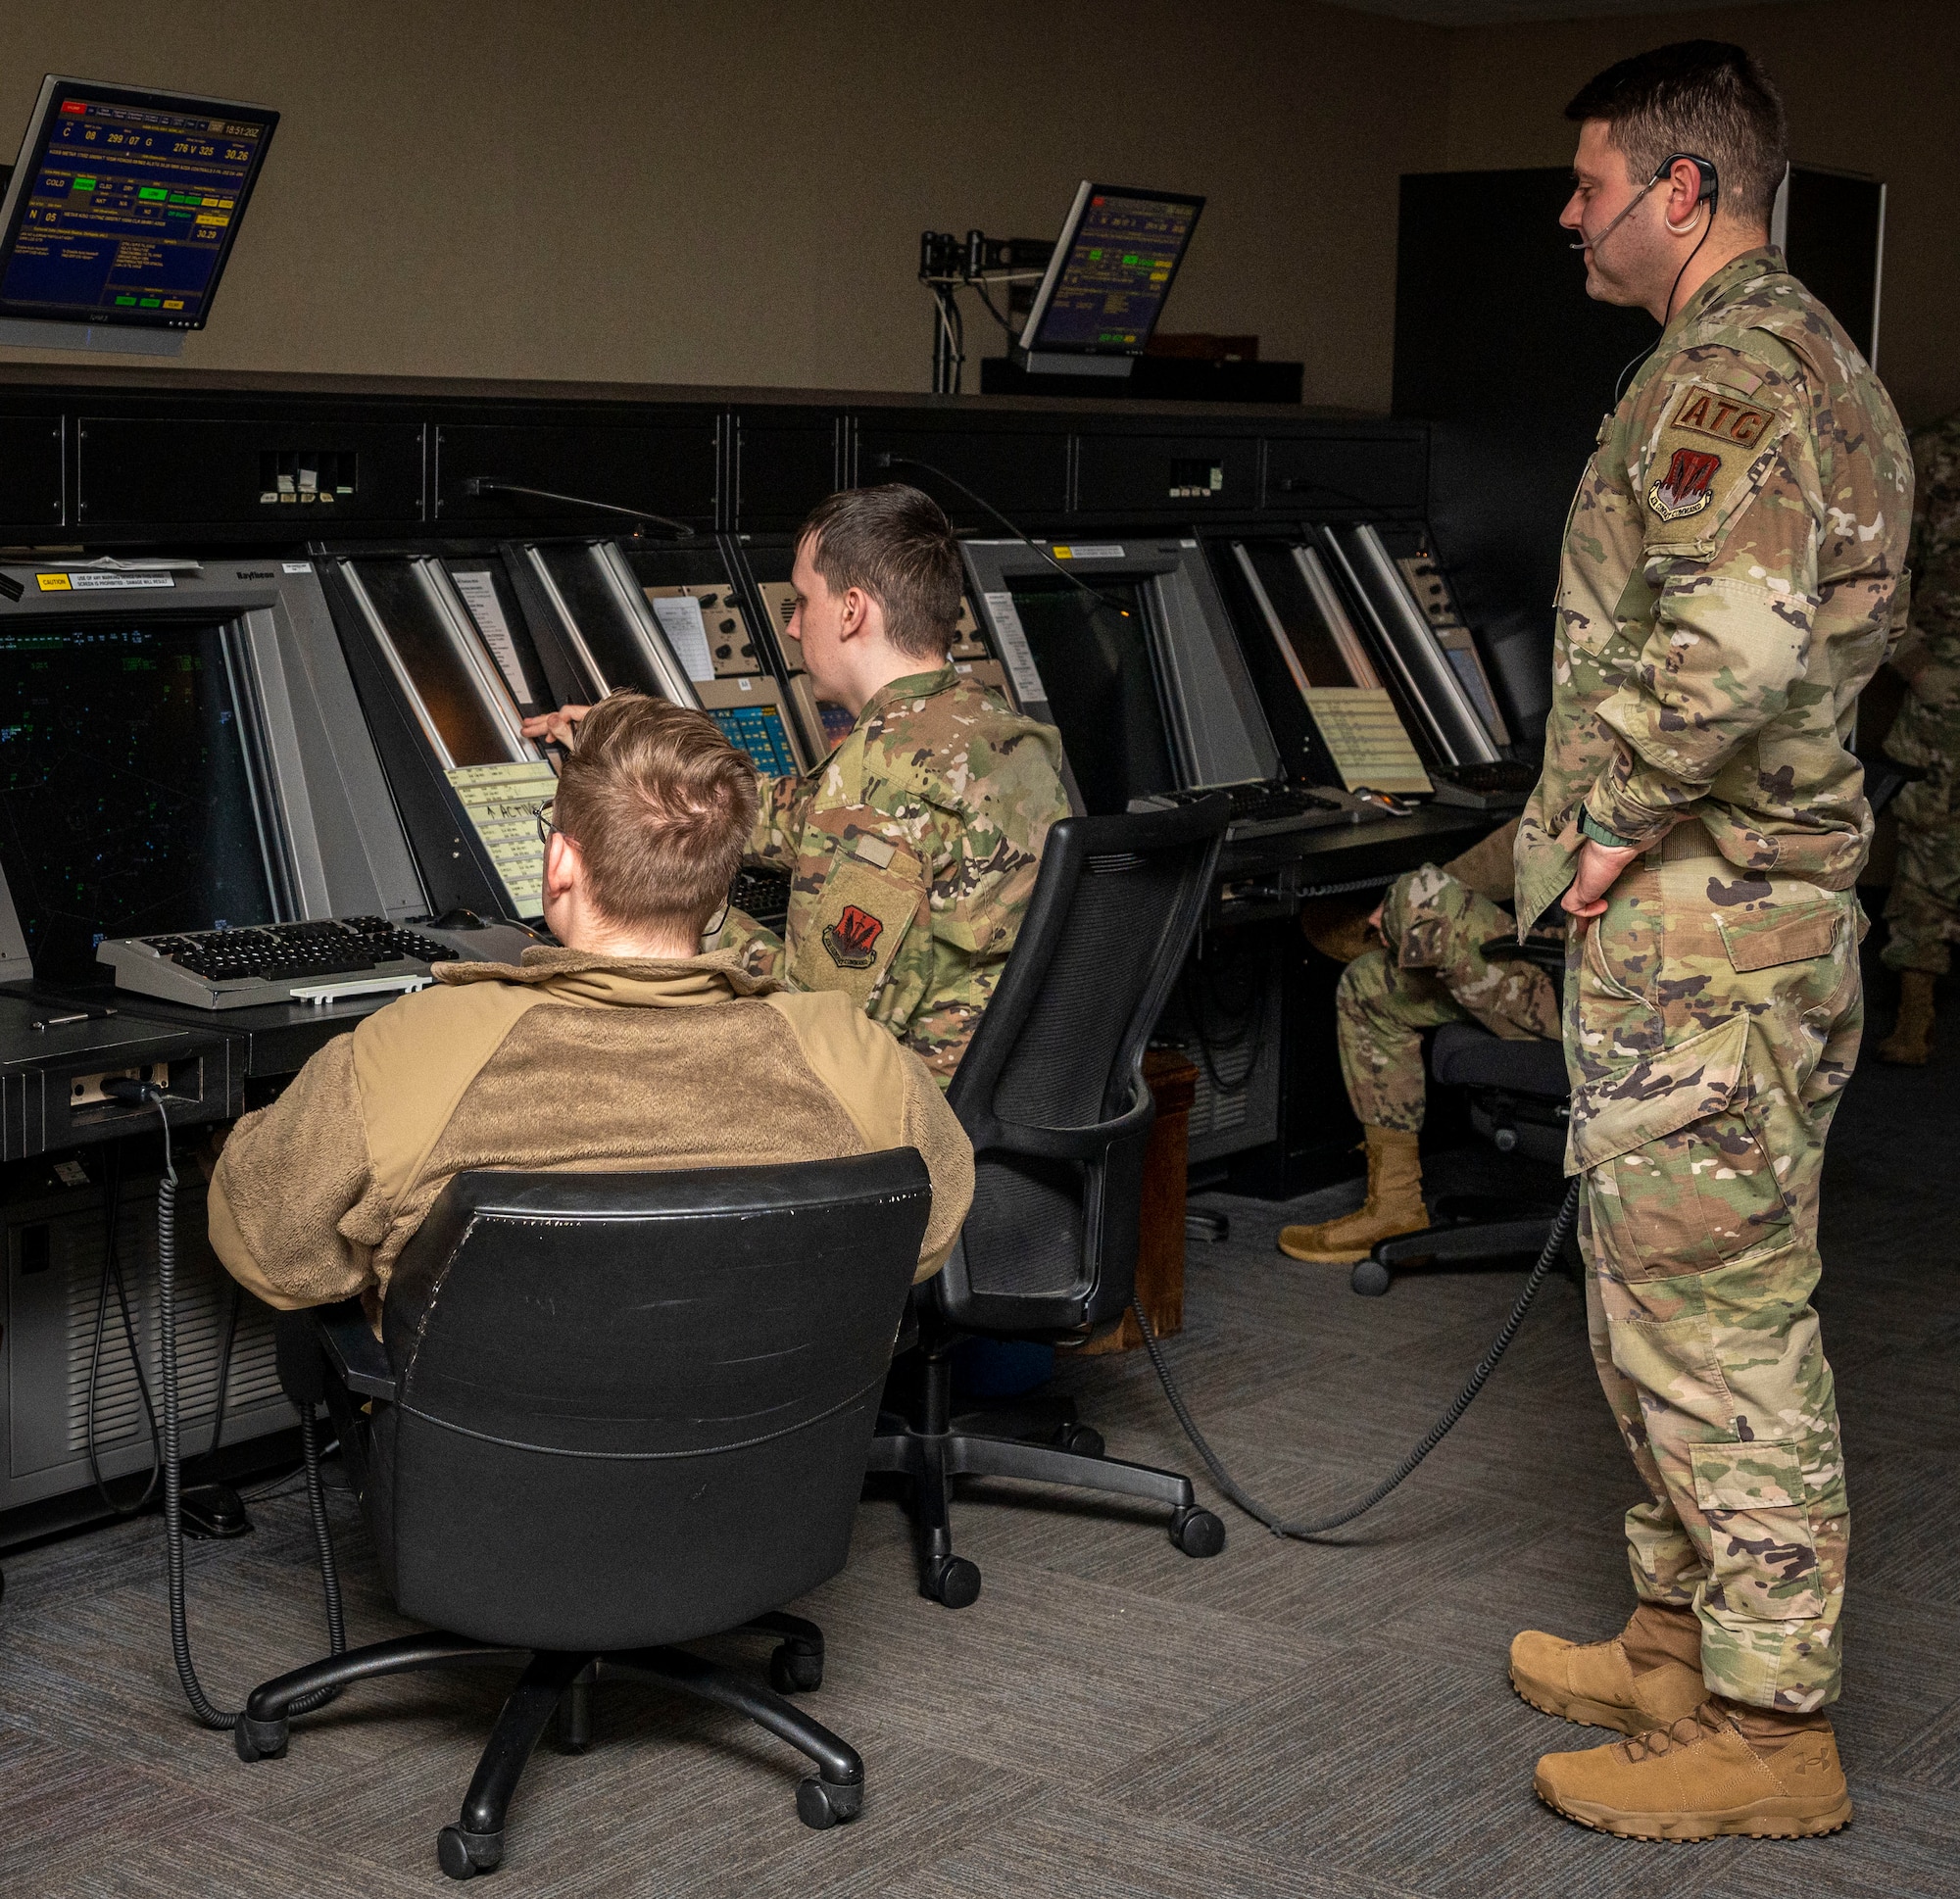 Airmen assigned to the 4th Operations Support Squadron Radar Approach Control train to ensure aircrew are safe at Seymour Johnson Air Force Base, North Carolina, Dec. 13, 2022. The 4th OSS RAPCON Airmen train to provide effective communication and reliable information to aviators to keep them safe. (U.S. Air Force photo by Airman 1st Class Sabrina Fuller)